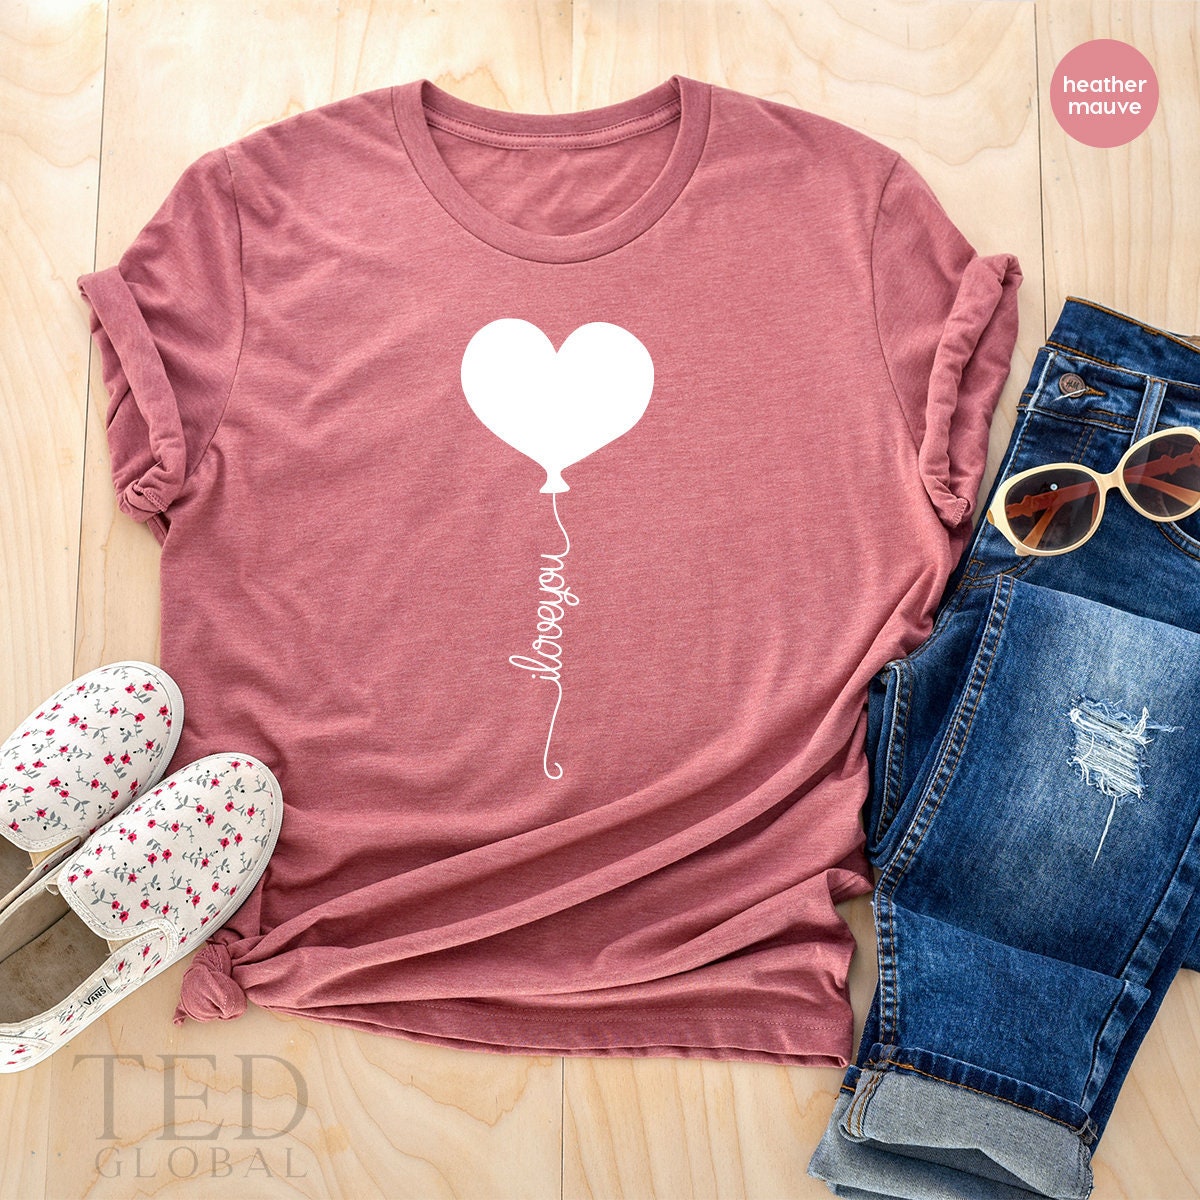 Love You Shirt,Valentines Day Shirt,Valentine Shirt,Valentines T Shirt,Couple Shirts,Hearts Ballon Tee,Shirt For Women,Valentines Day Gift - Fastdeliverytees.com